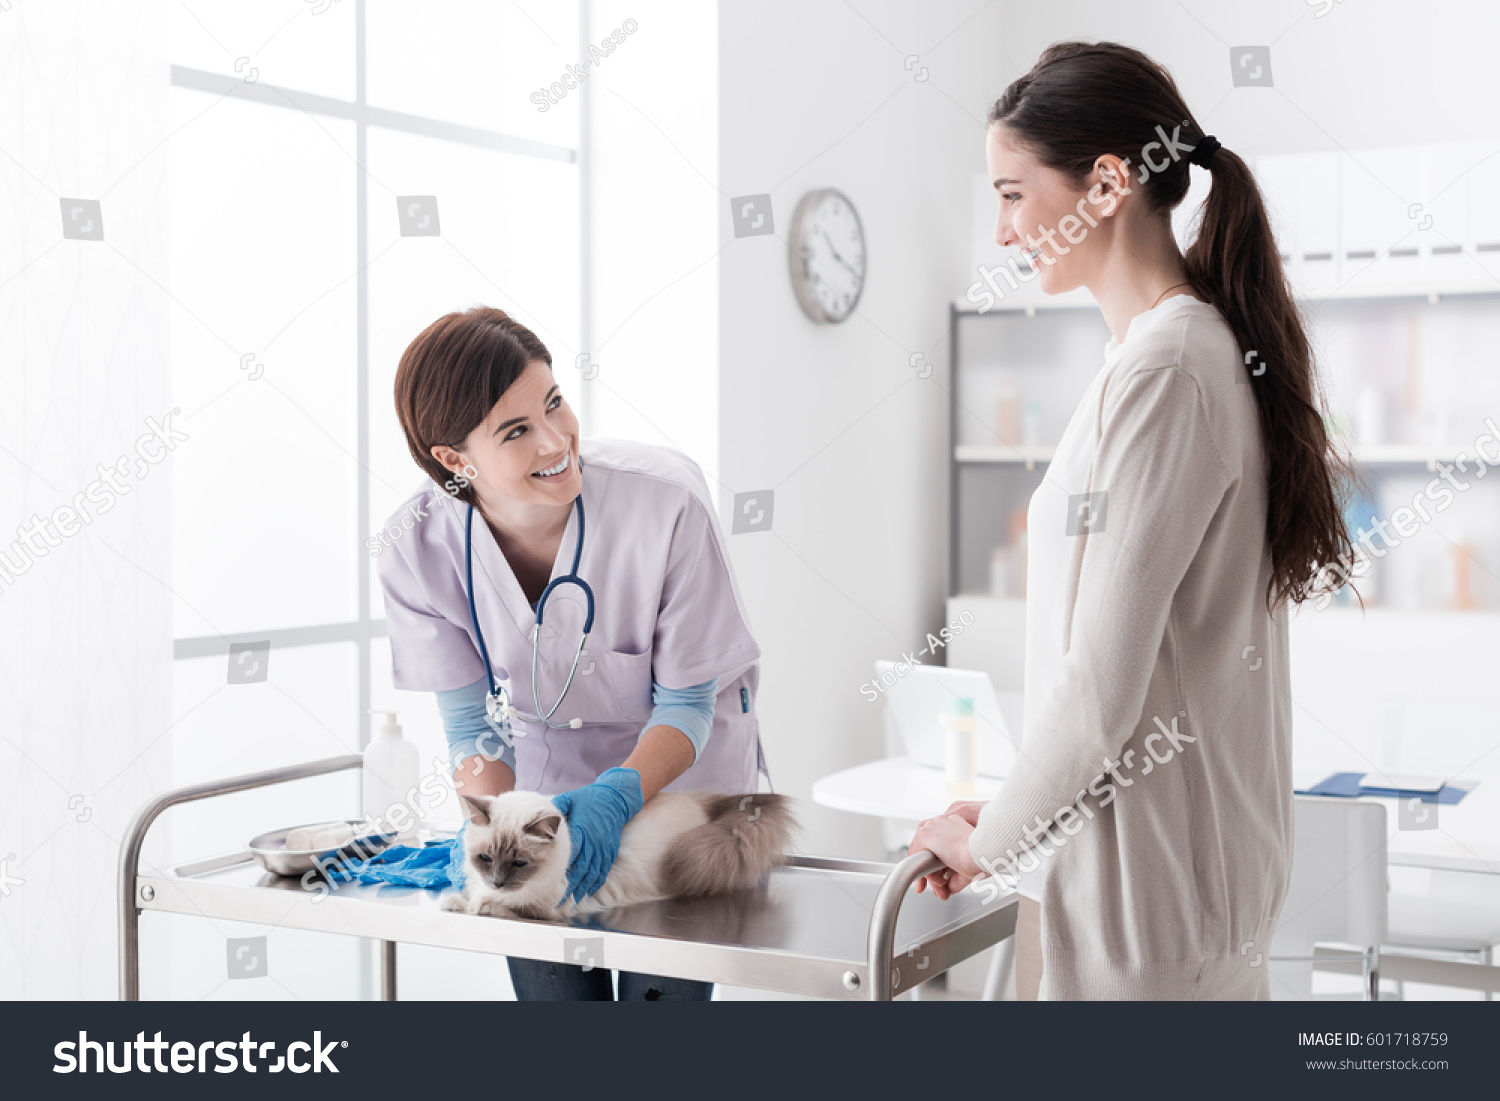 Professional veterinarian working at the veterinary clinic, she is examining a cat on the medical examination table, the pet owner is assisting and smiling #601718759